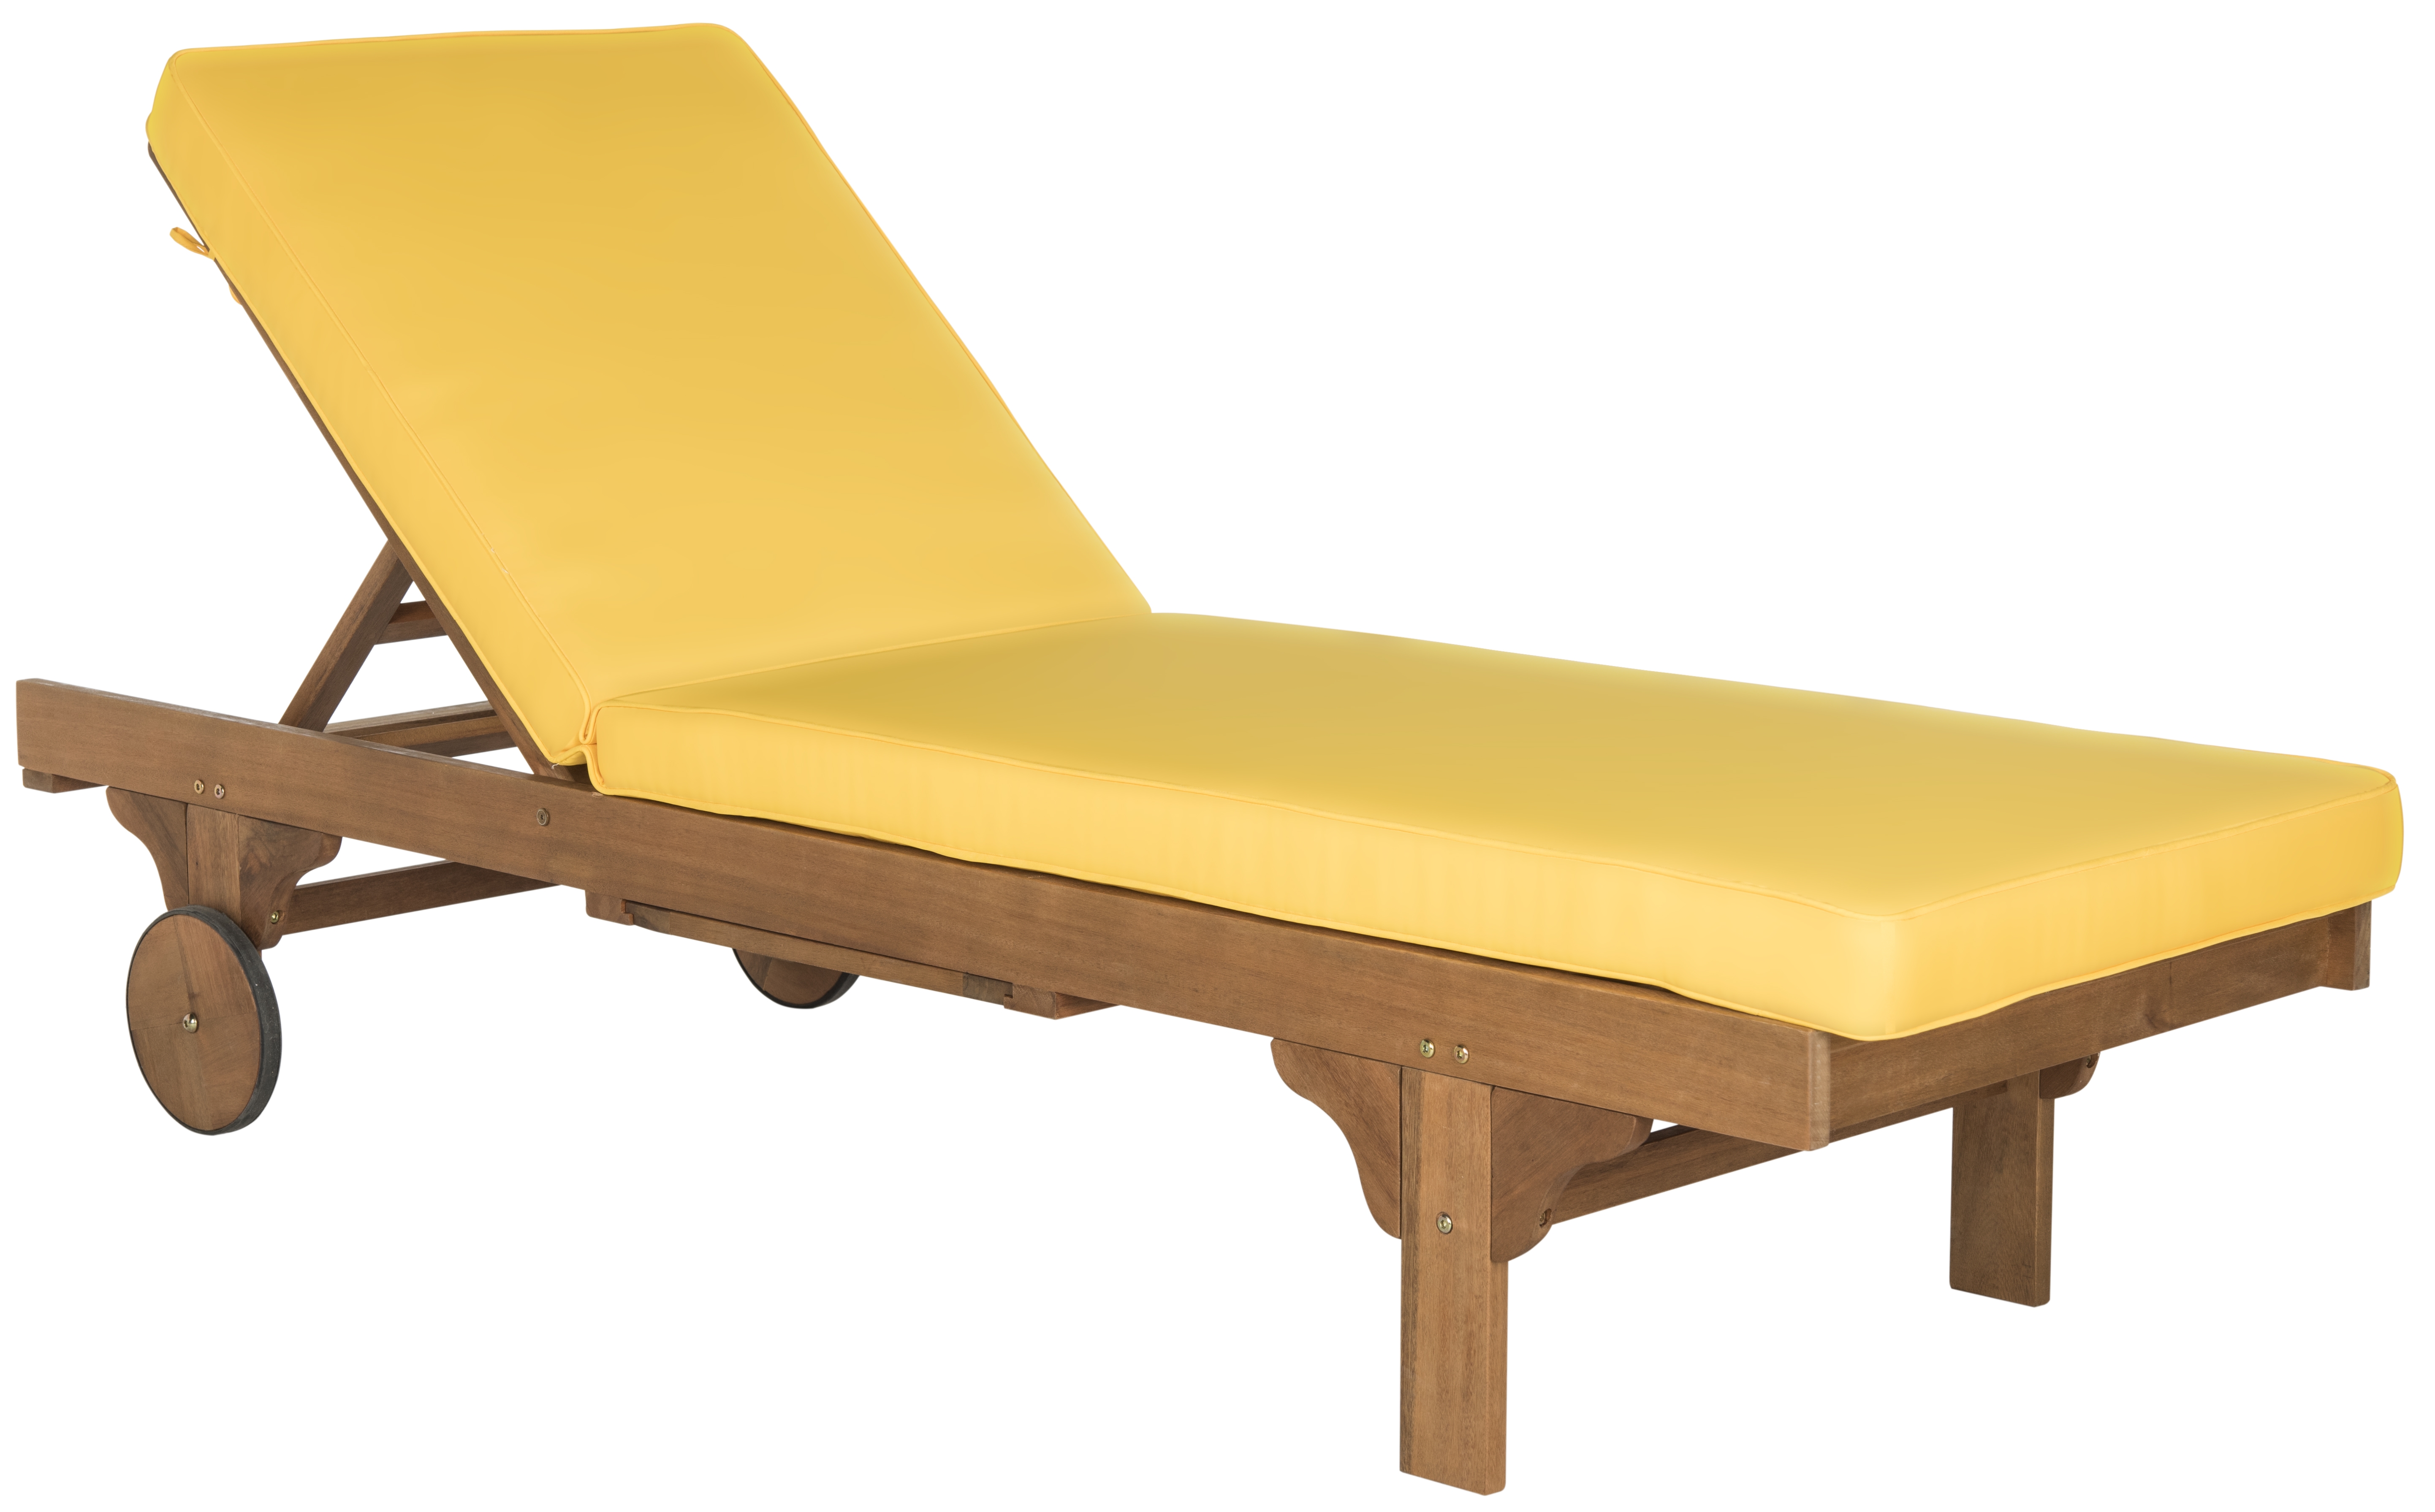 Newport Chaise Lounge Chair With Side Table - Natural/Yellow - Arlo Home - Image 1